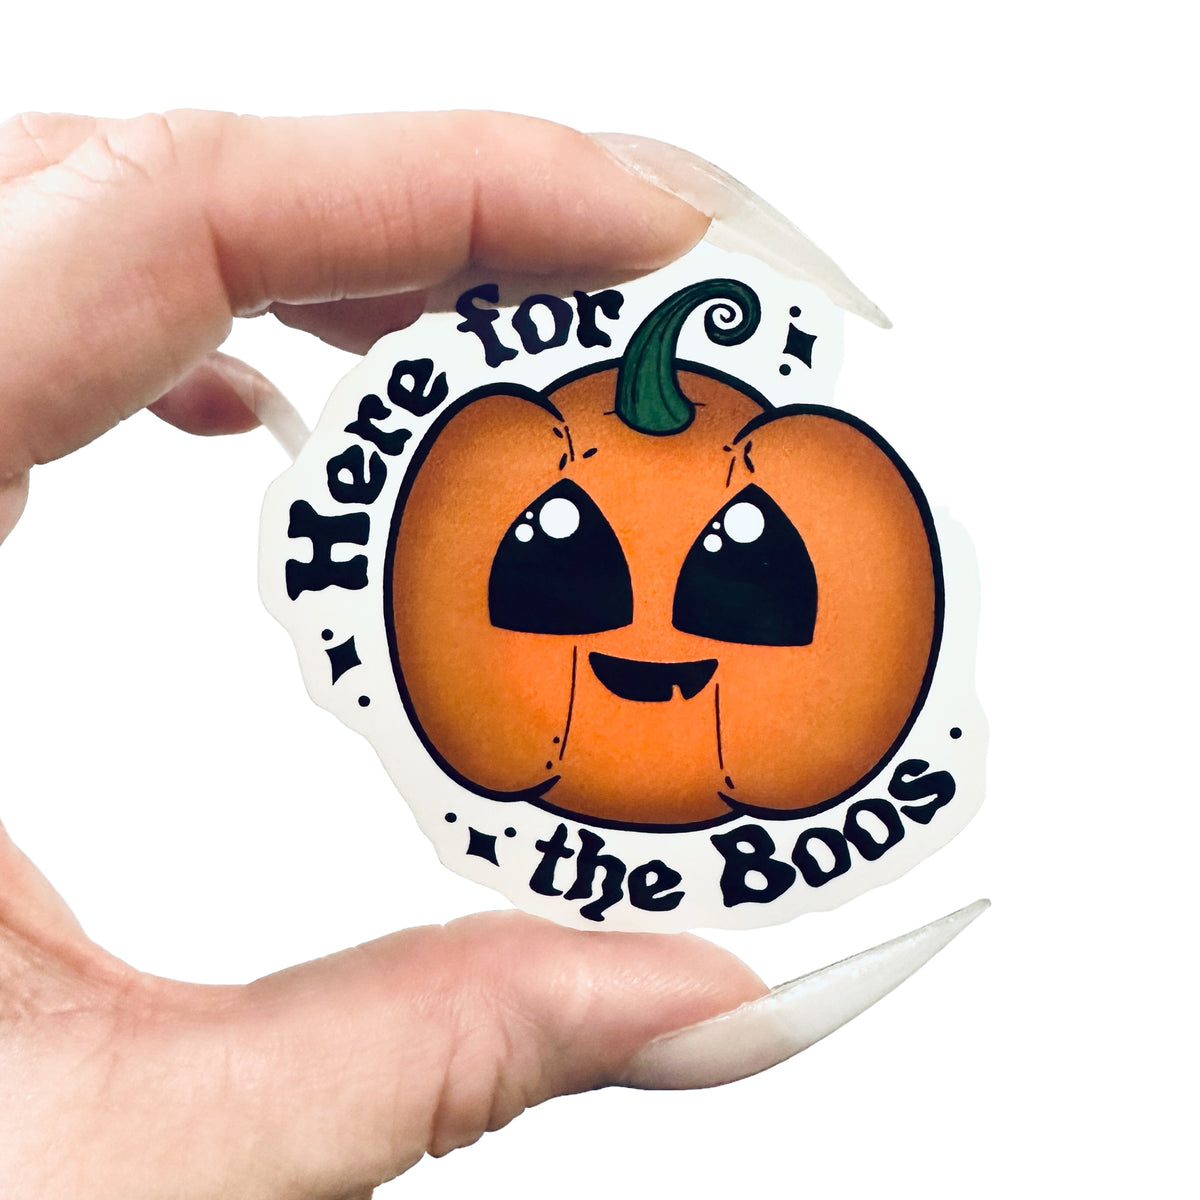 Here For the Boos Pumpkin Sticker